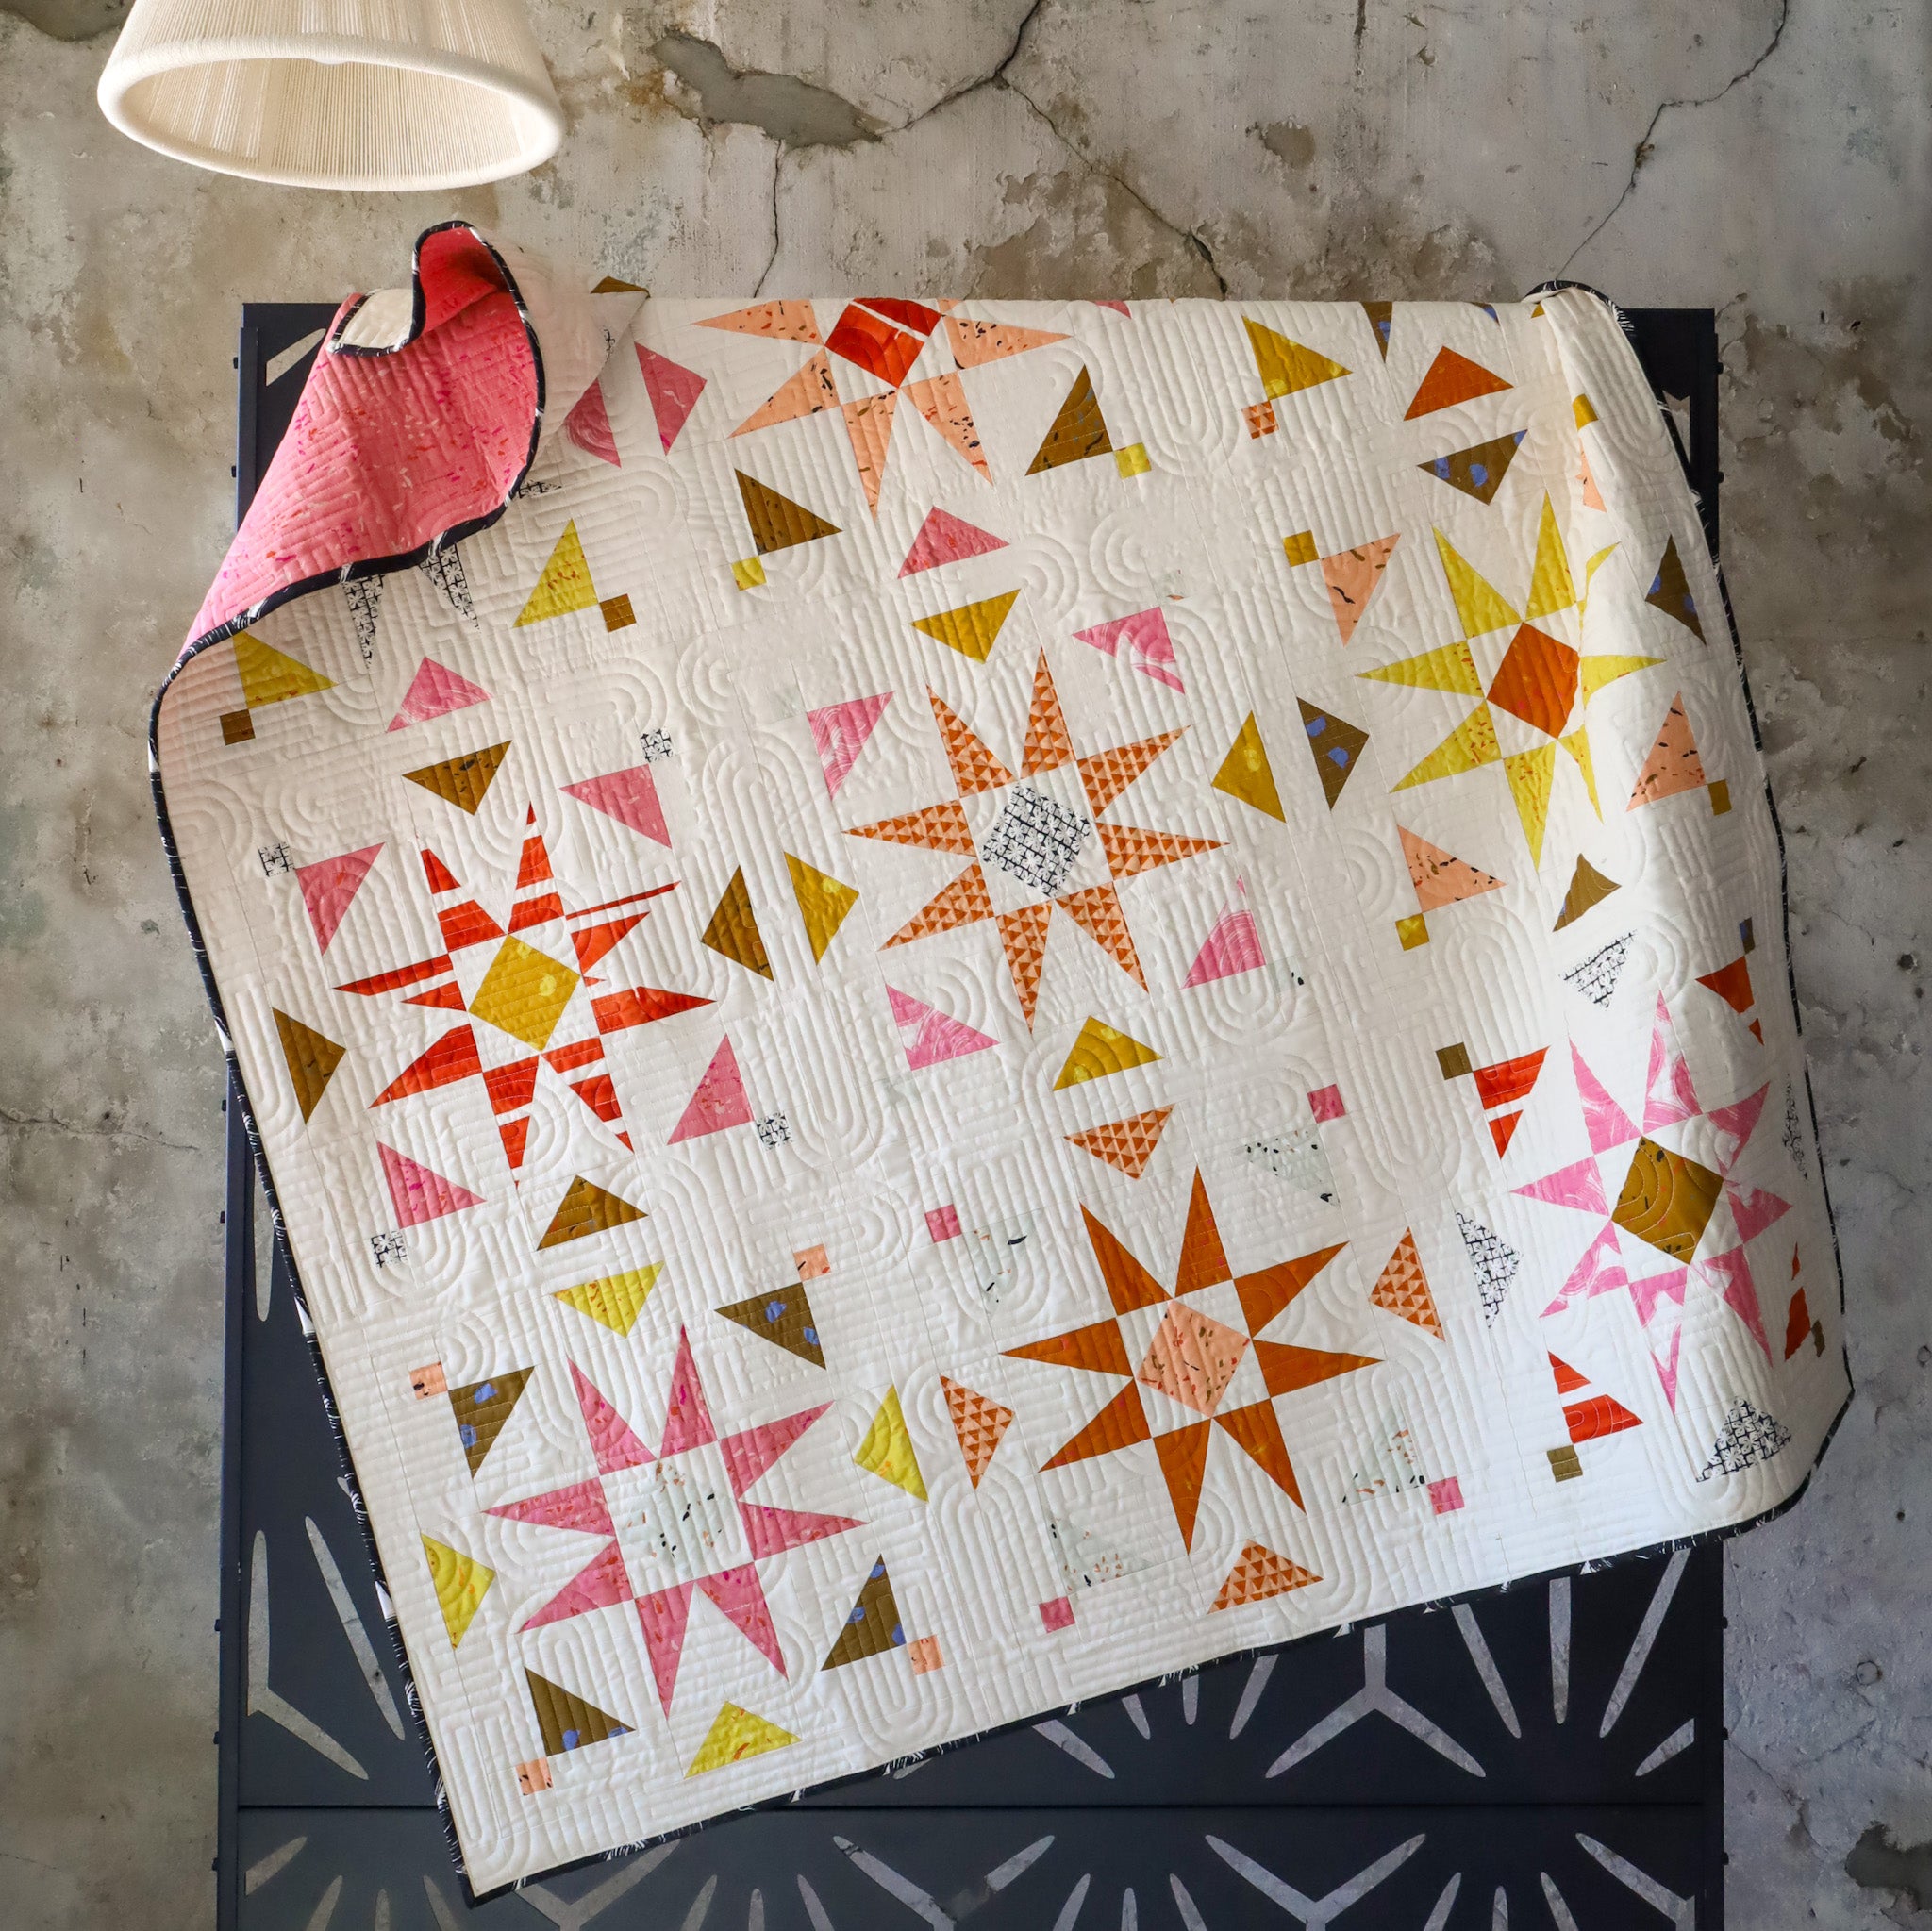 Mosaic Star Quilt - using the Sketchbook collection